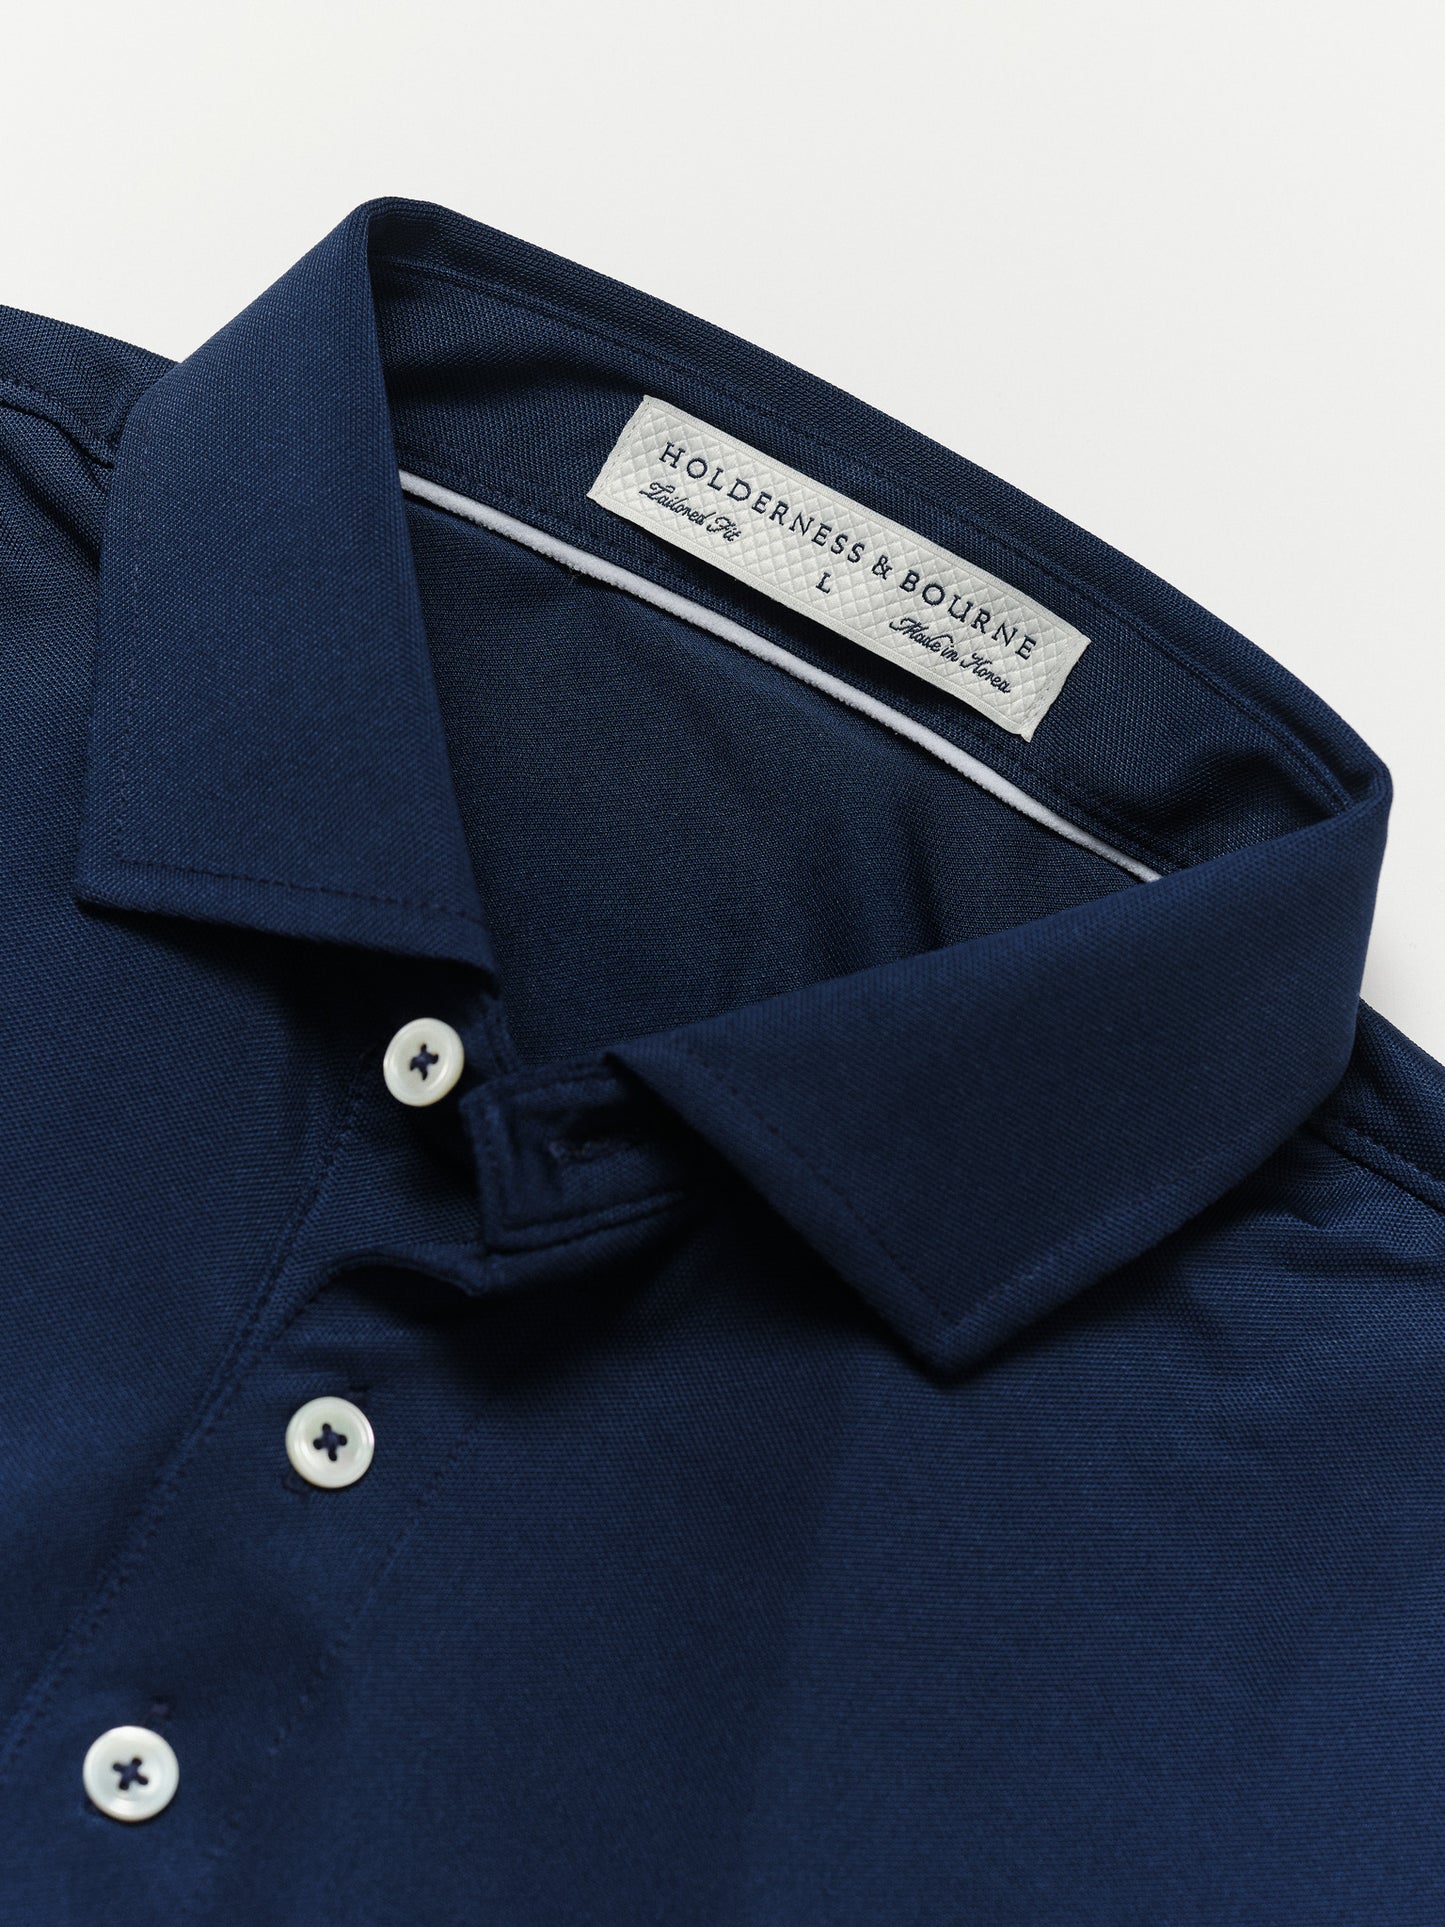 Holderness & Bourne Performance Polo in Navy